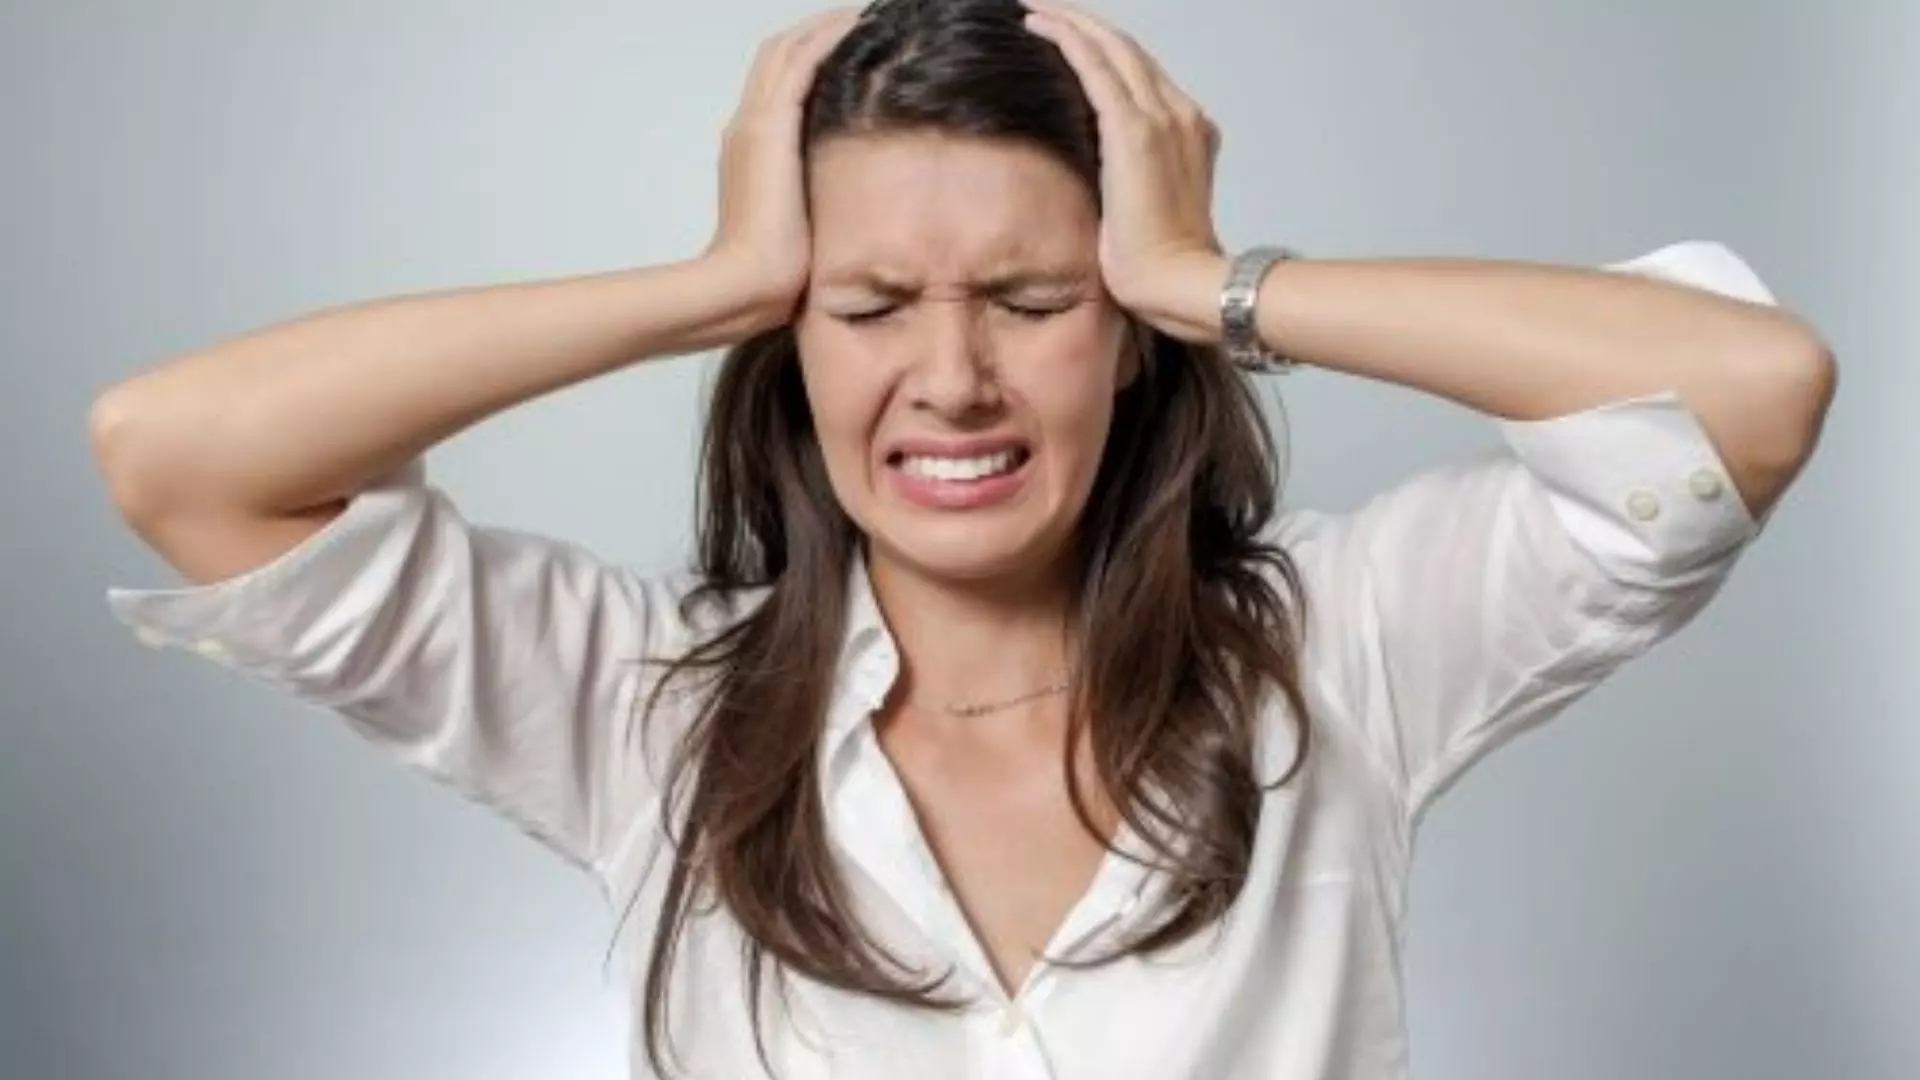 Eighty Five Percent of Women in the World Suffer from Migraine